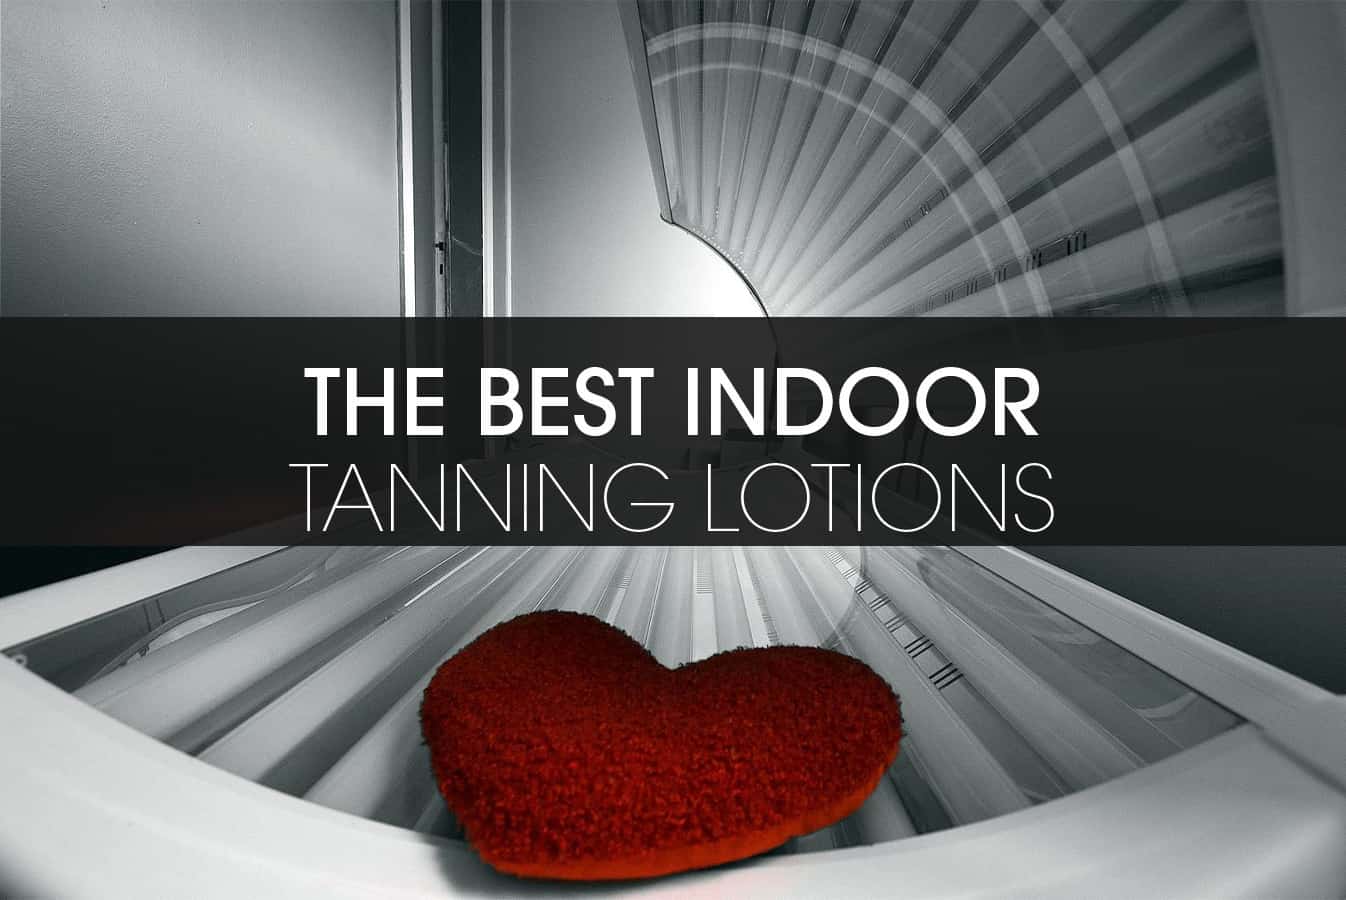 Best indoor tanning lotions featured image